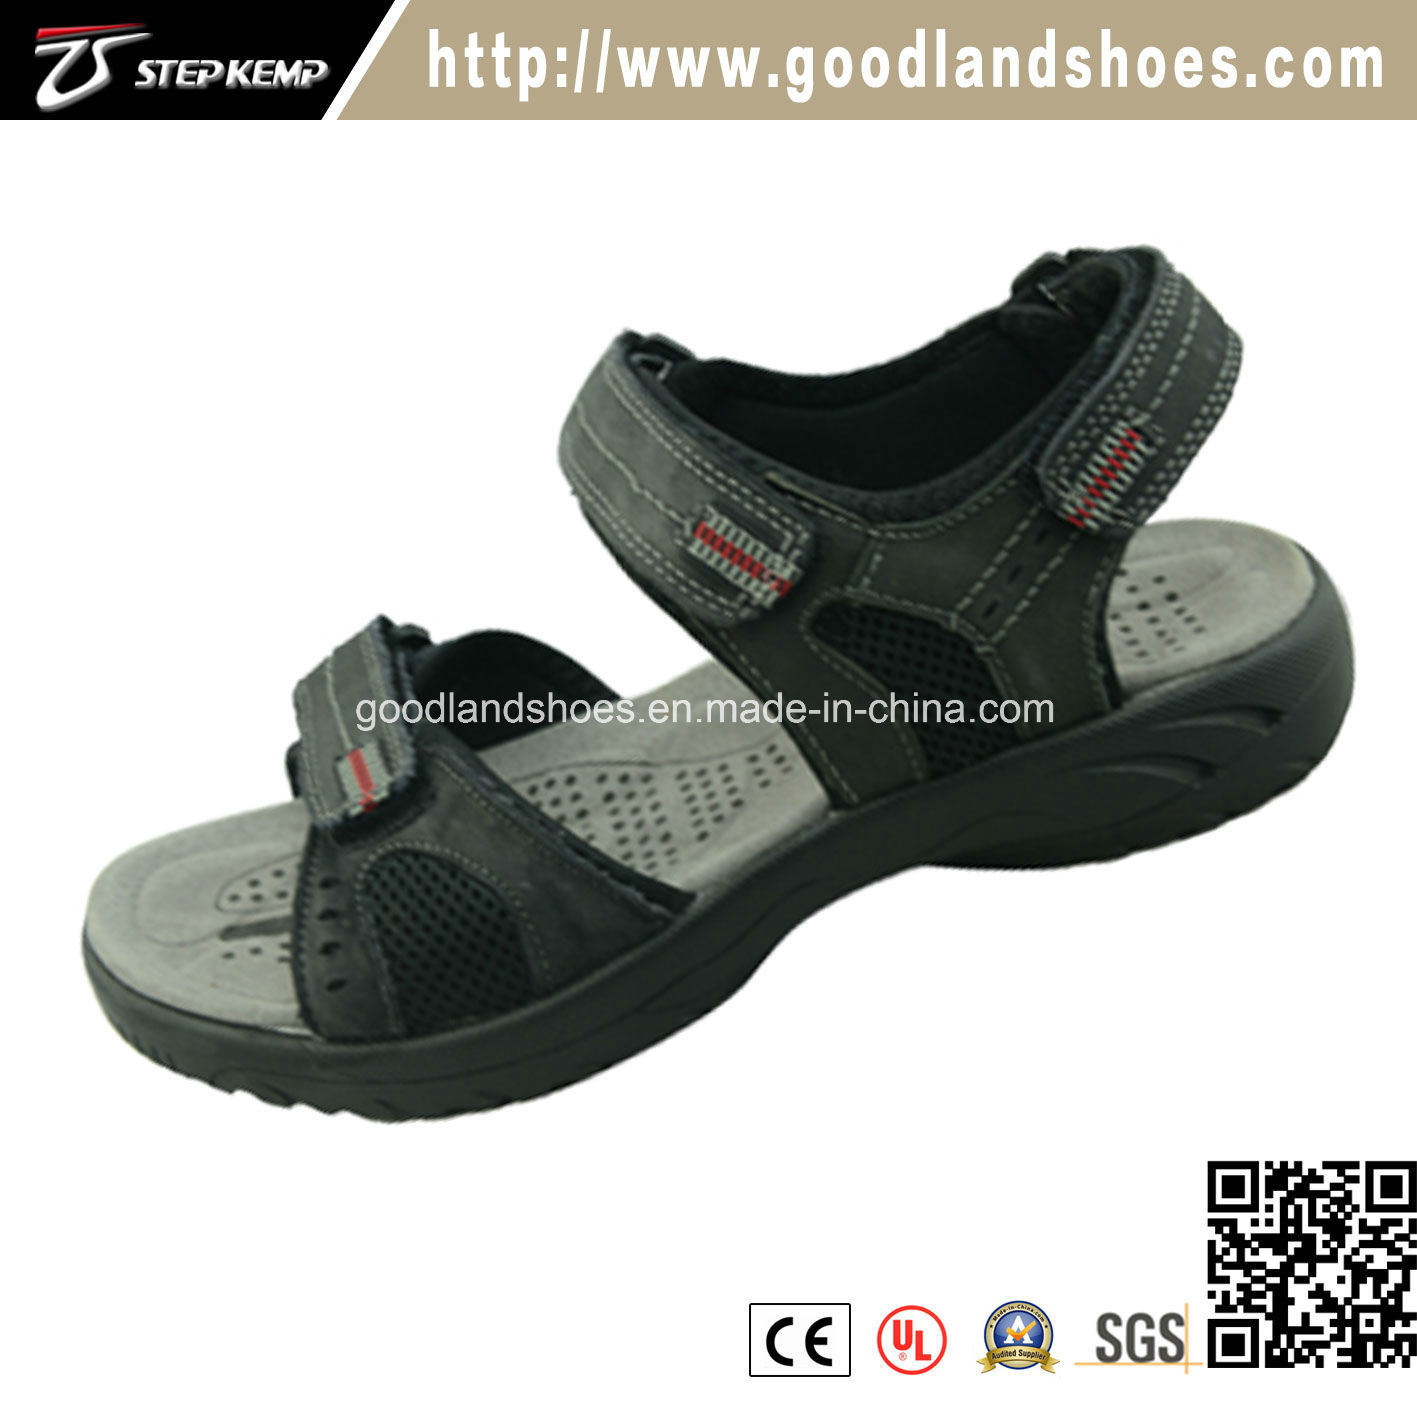 New Fashion Style Summer Beach Breathable Men's Sandal Shoes 20026